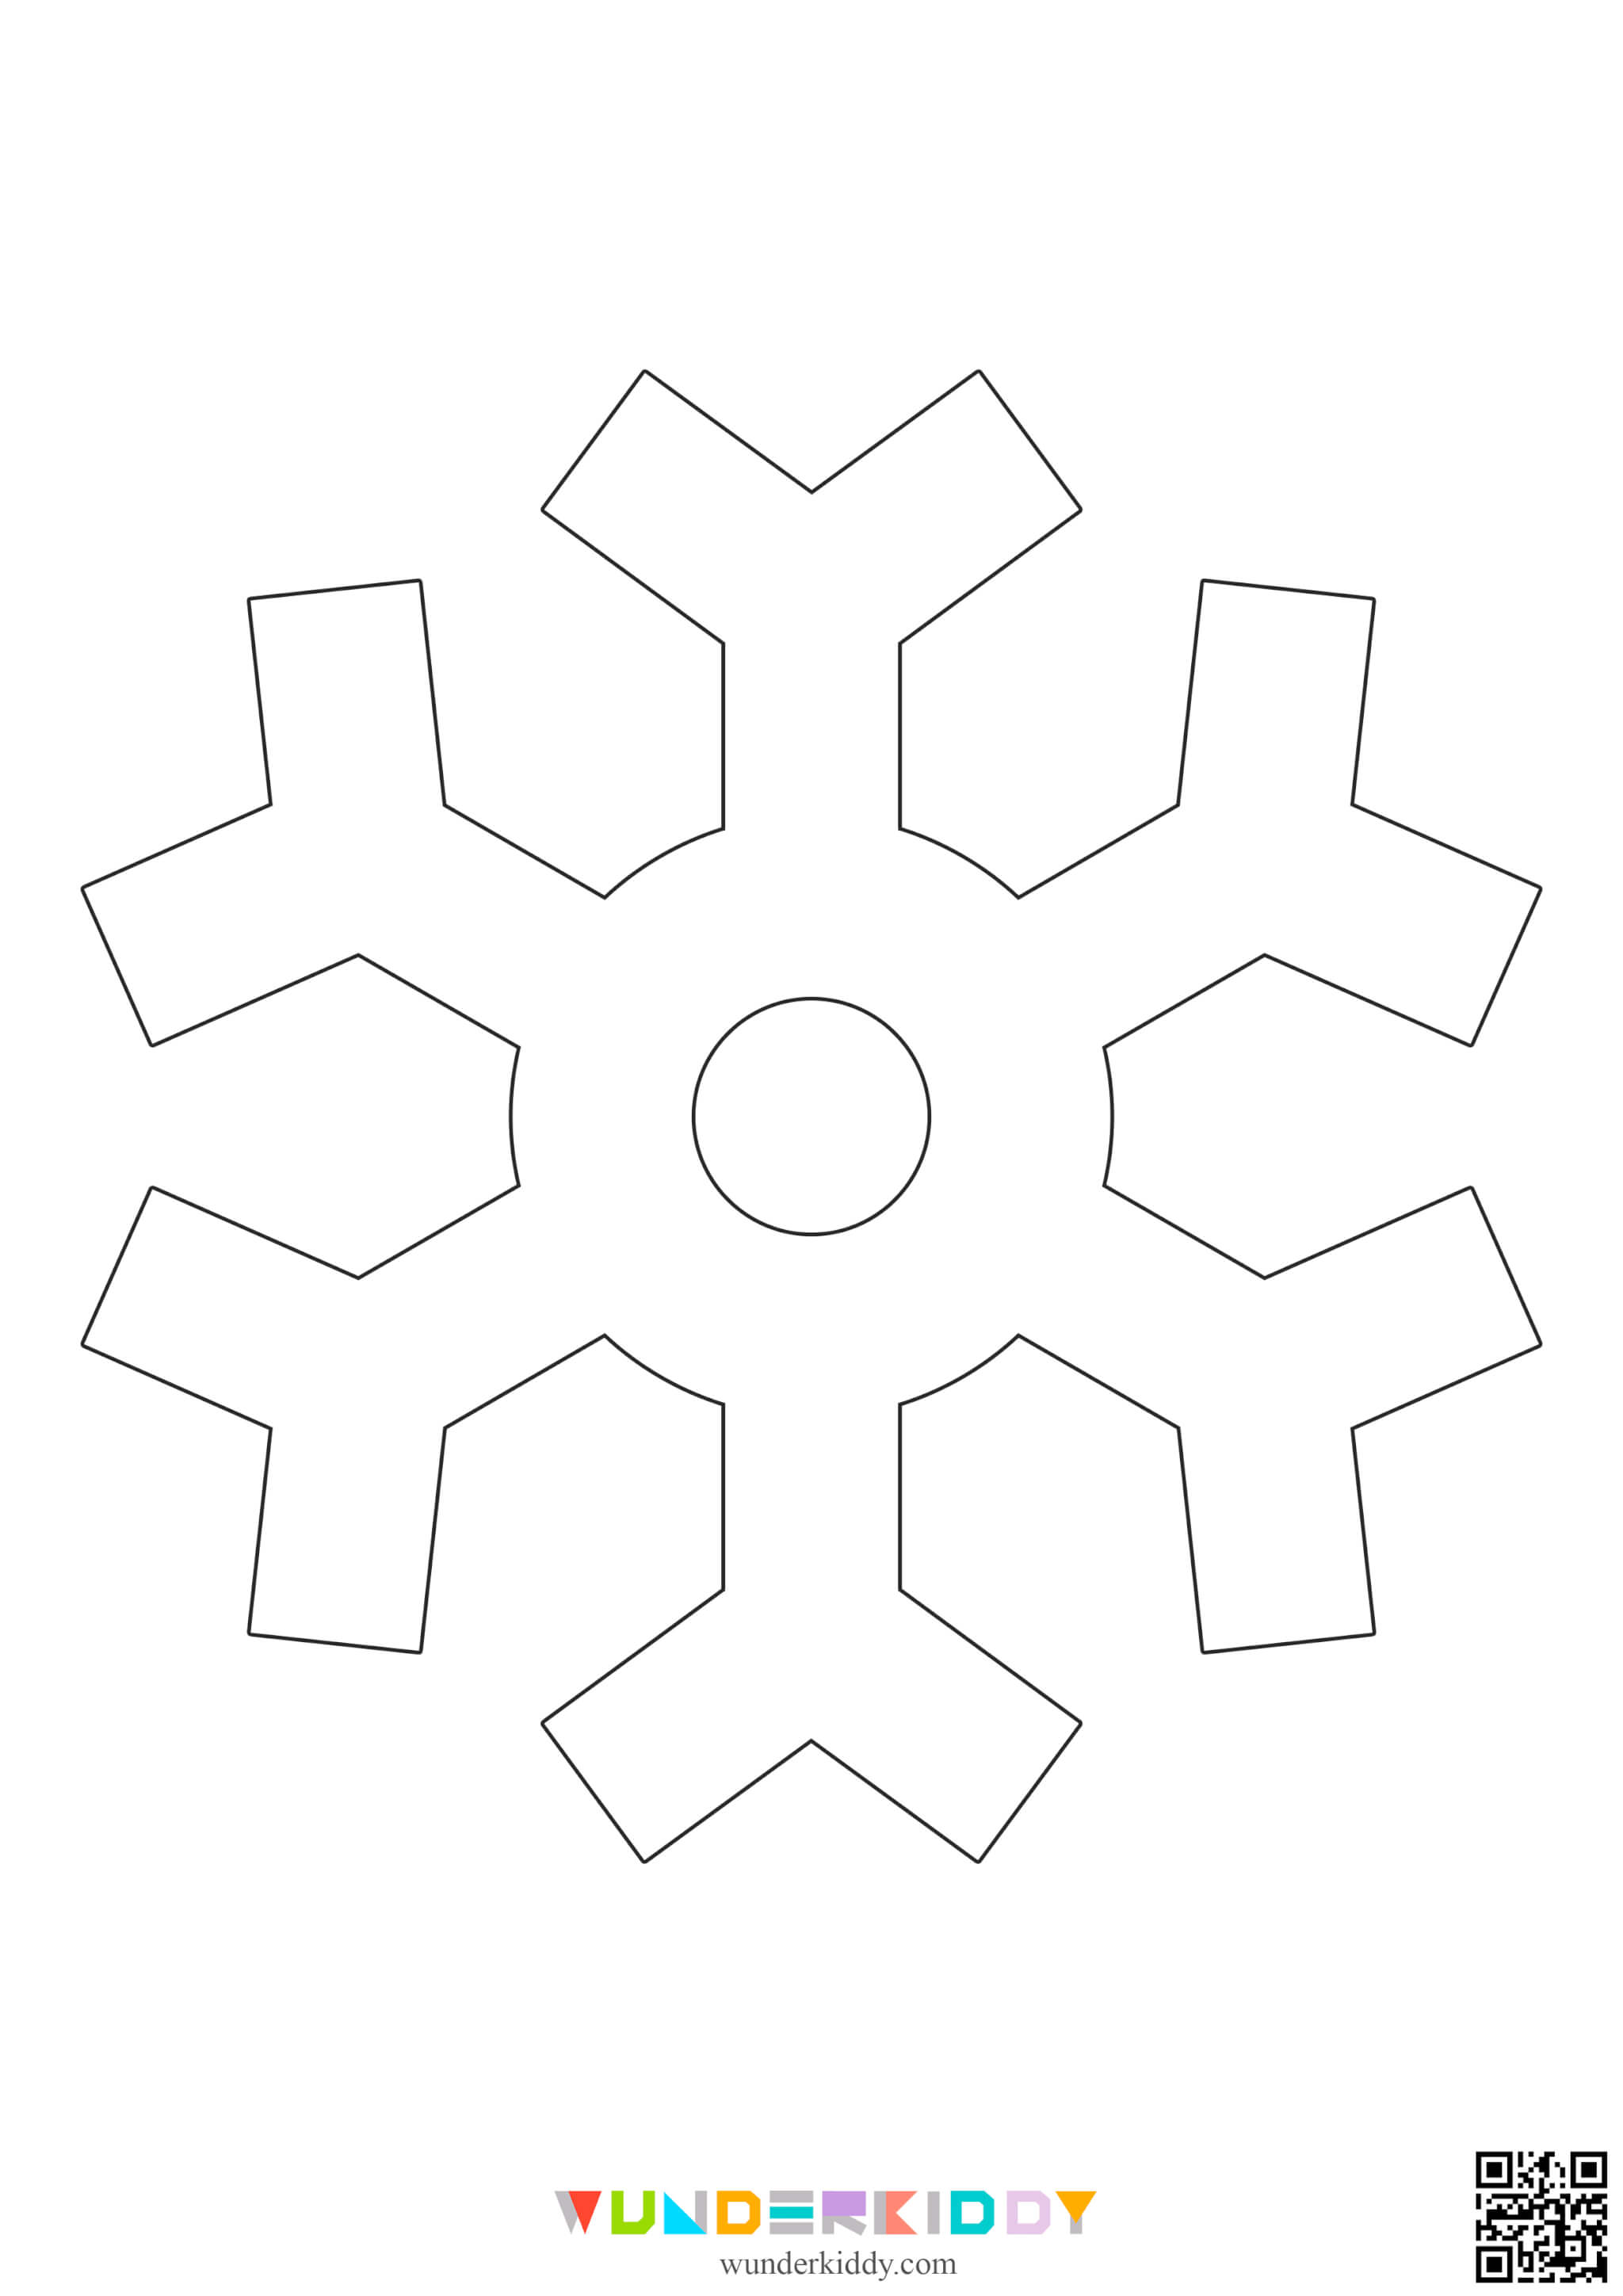 Snowflakes Template - Image 11